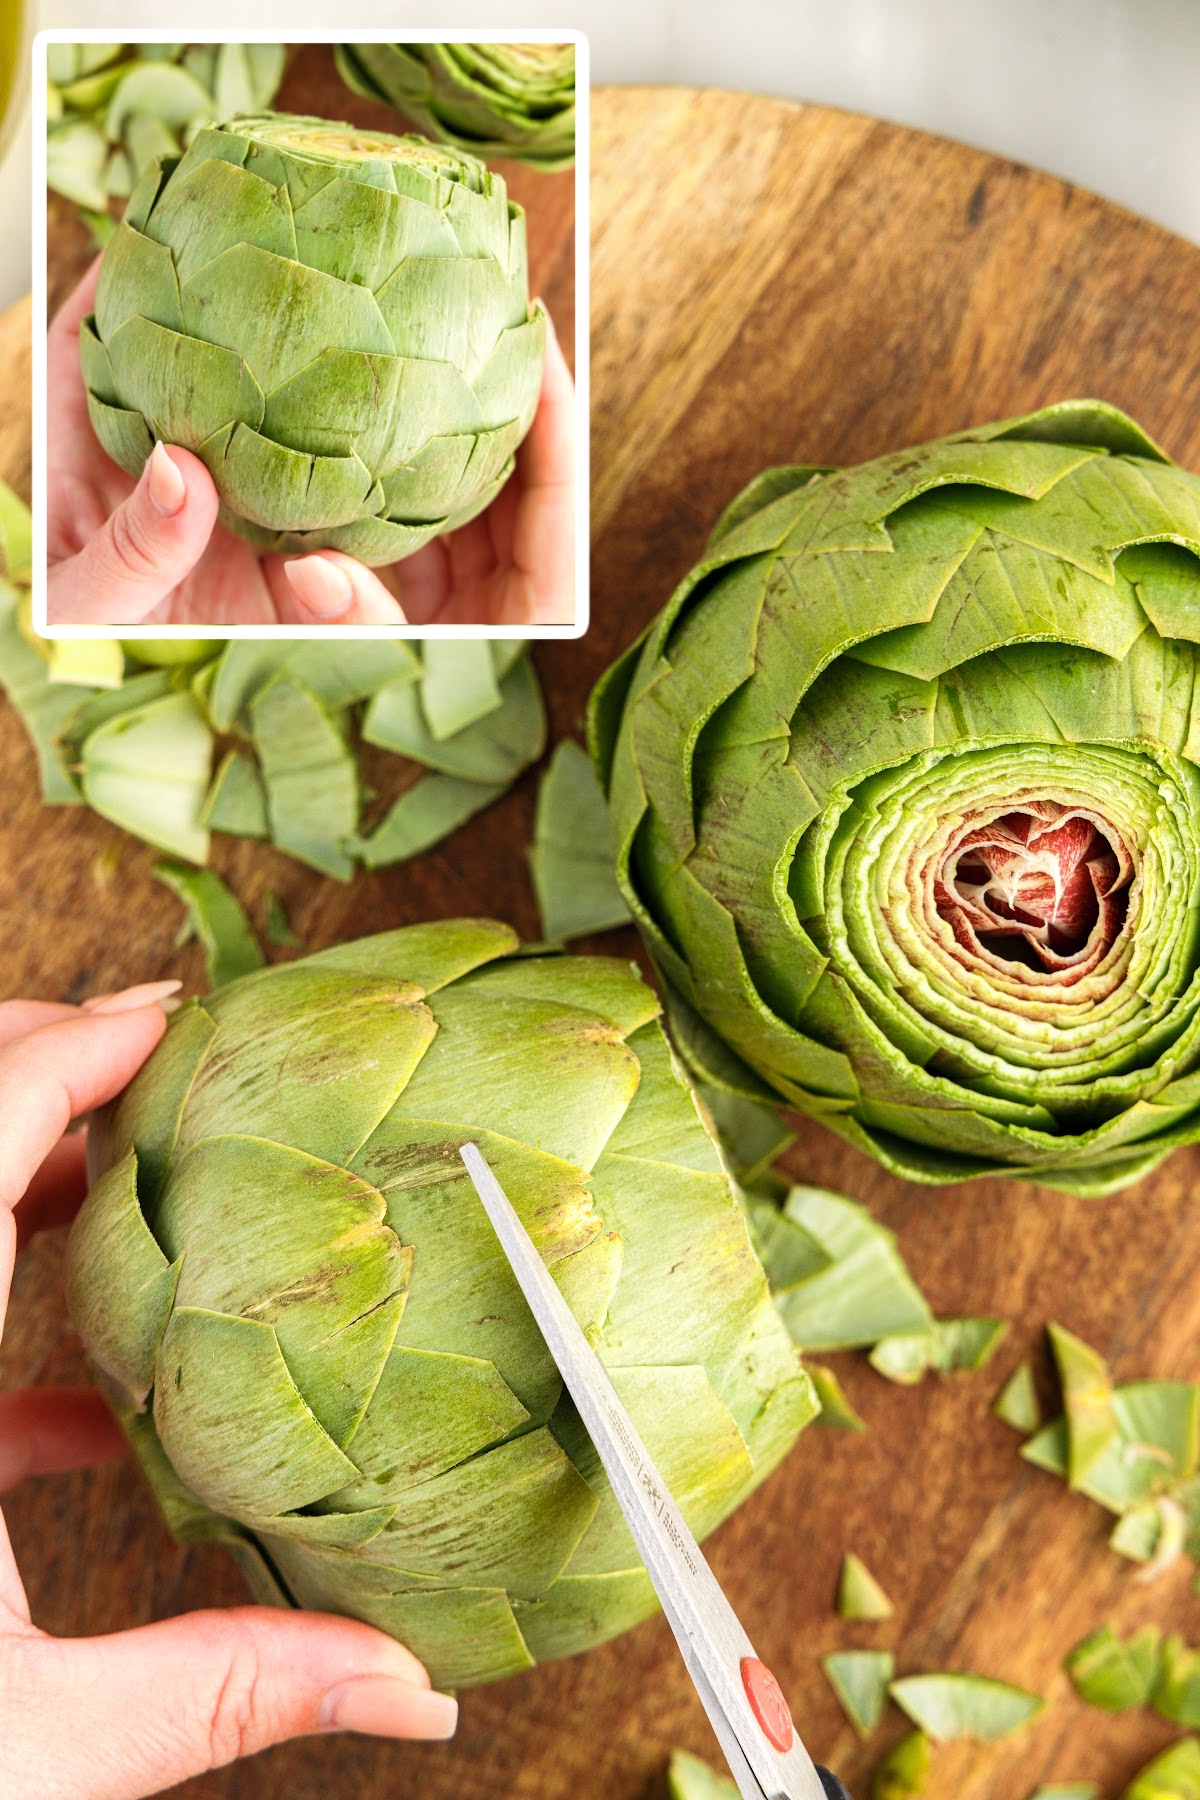 An artichoke being sliced and an image of a whole artichoke.